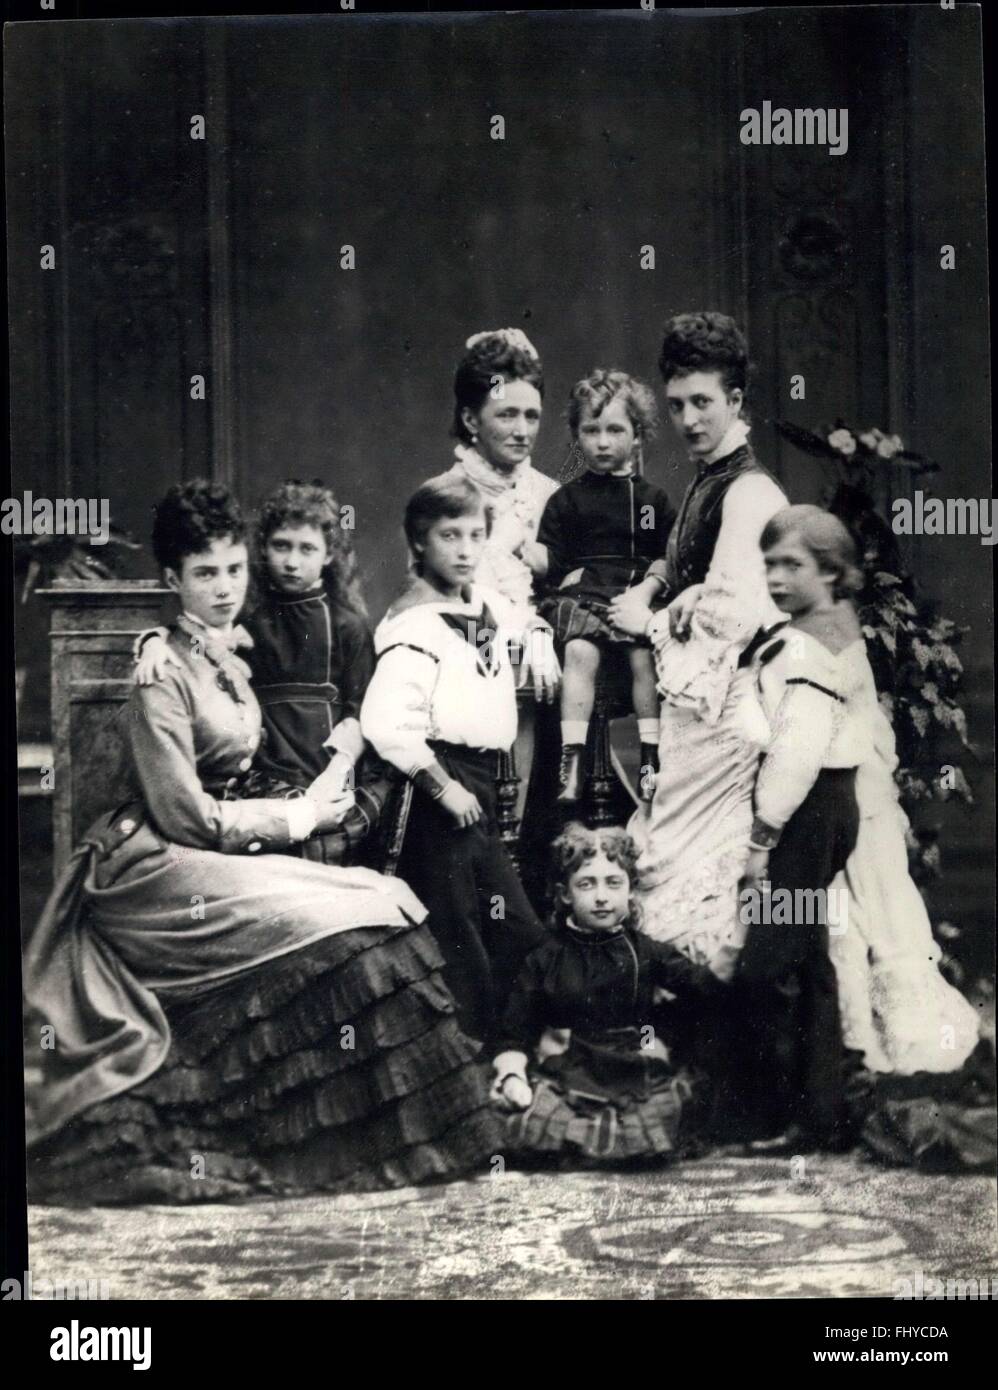 1907 - In Victoria's Reign. The Princess of Wales with her mother, sister, and children. Alexandra wife of Edward (later King Edward VII) 1901, daughter of King Christian of Denmark. Alescandra, daughter of Christian IX of Denmark Mother Louise (daughter of the Cond-grave Hesse-Cassel) Alescandra had six children (3 boys and 3 girls). Sister Dagmar (married Alexander III of Russia) © Keystone Pictures USA/ZUMAPRESS.com/Alamy Live News Stock Photo